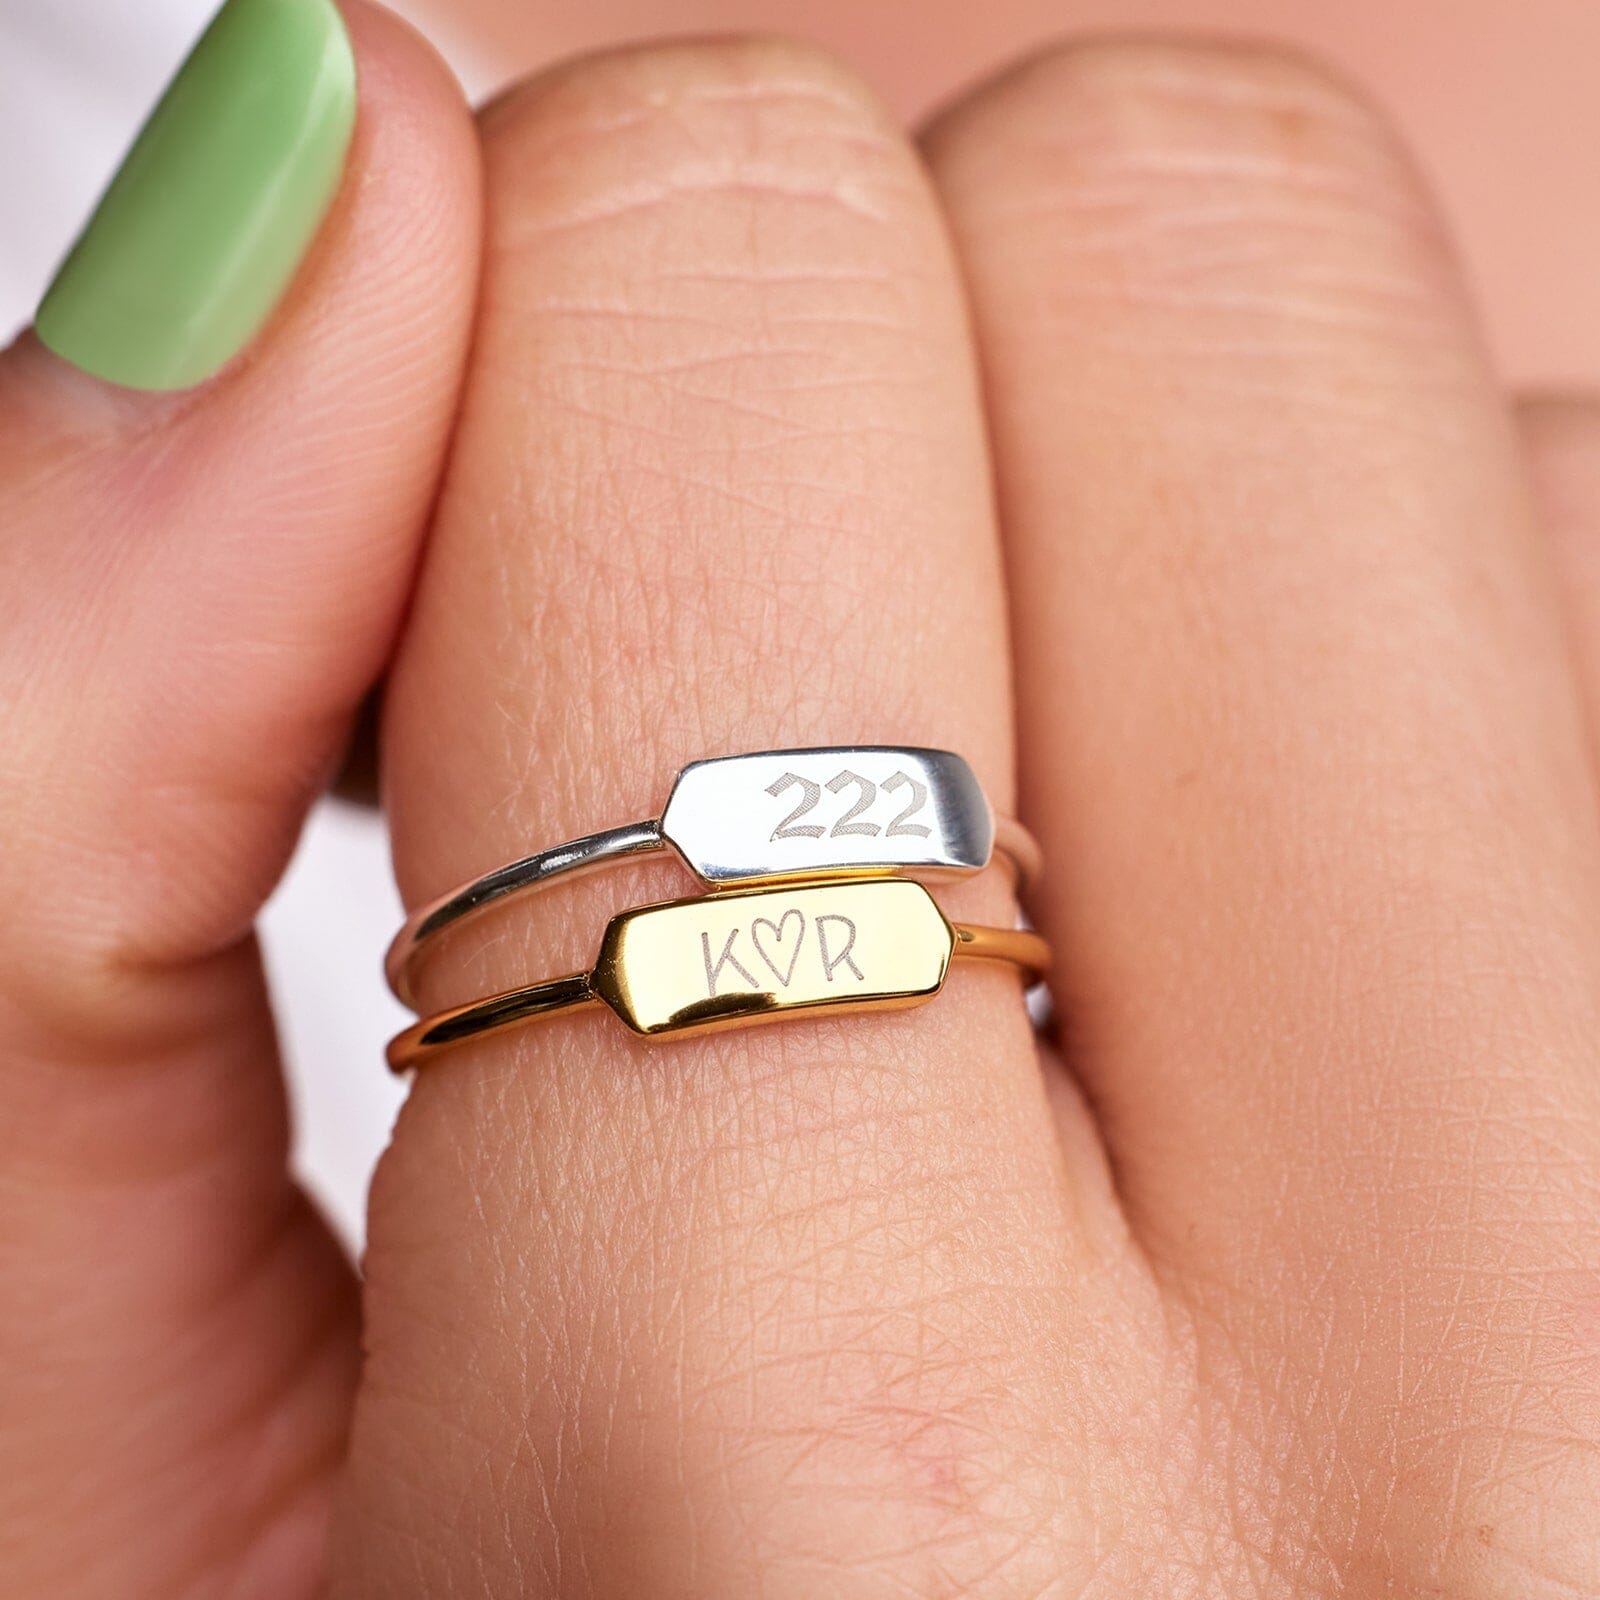 Custom Engraving — With These Rings